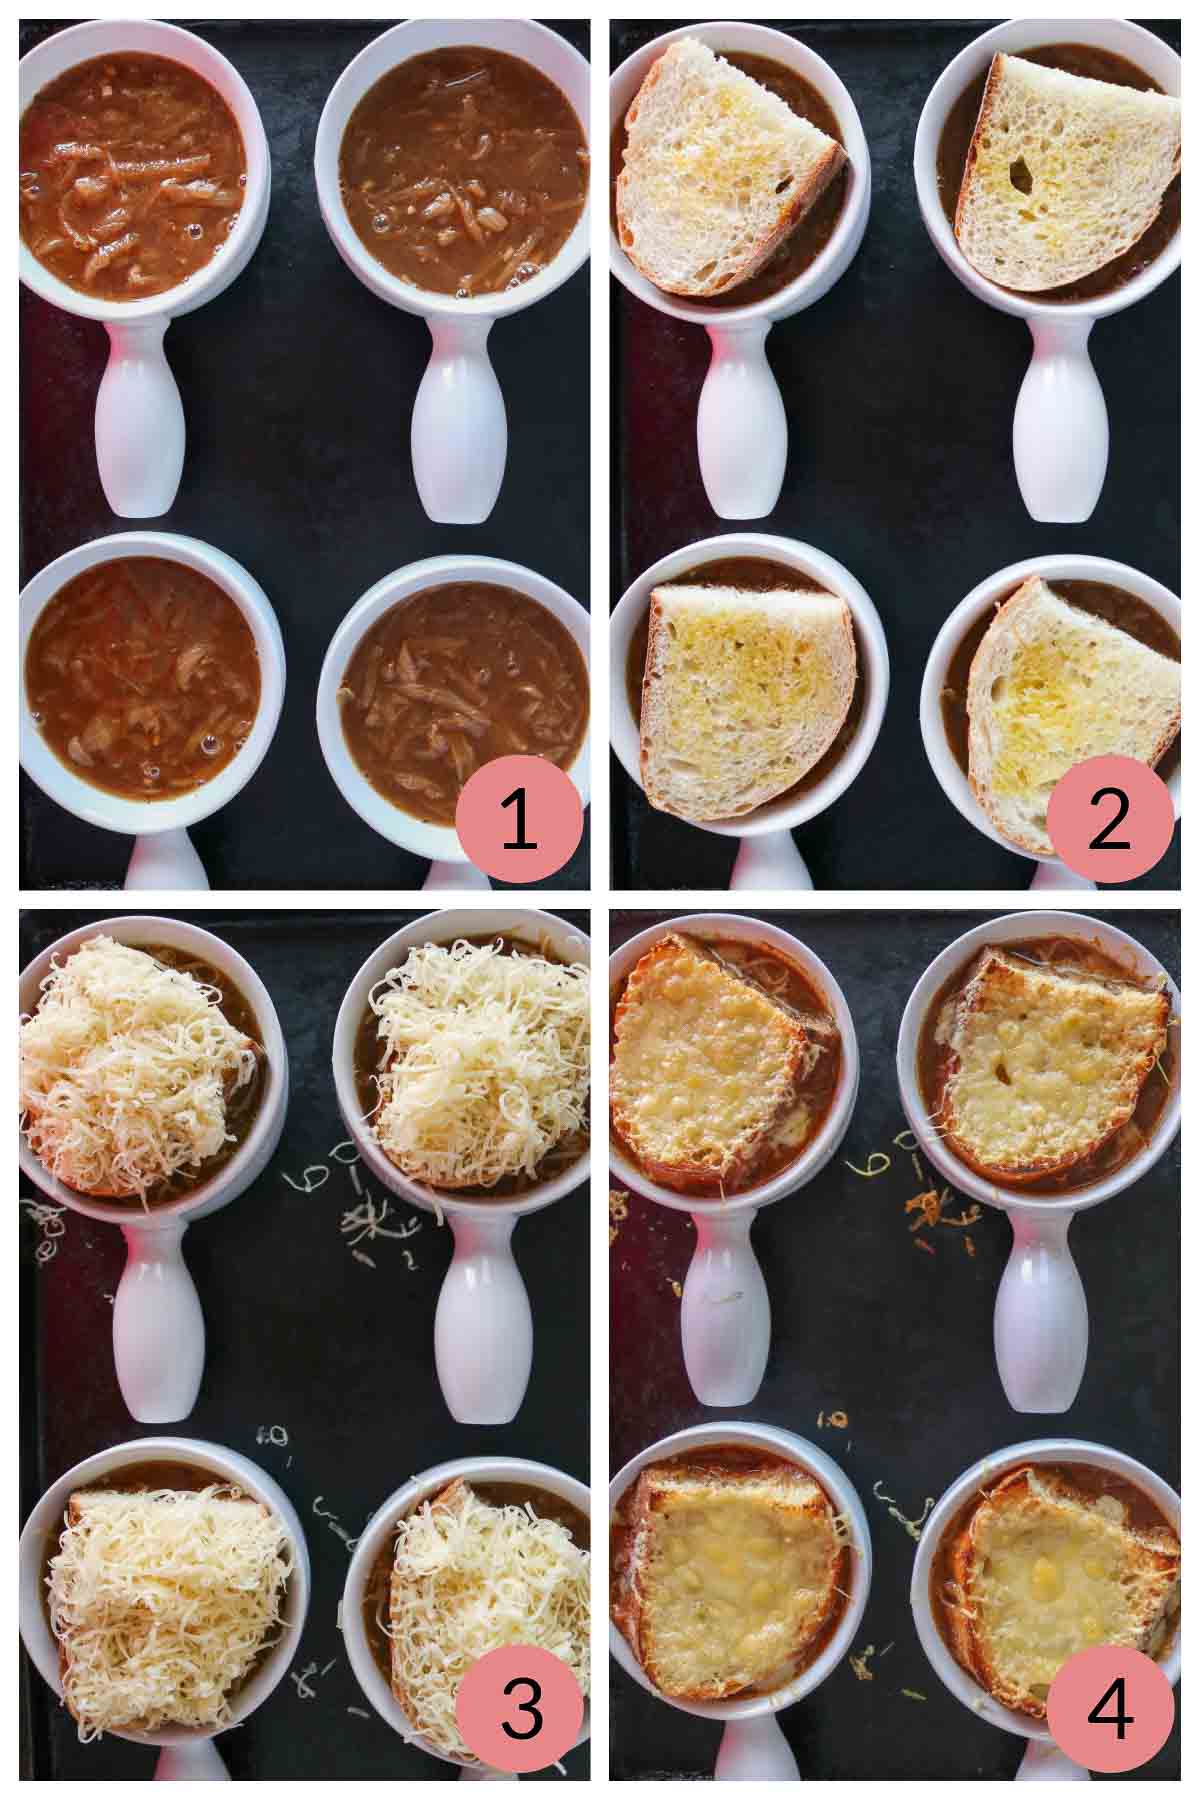 Collage of steps to assemble French onion soups into bowls with bread and cheese.